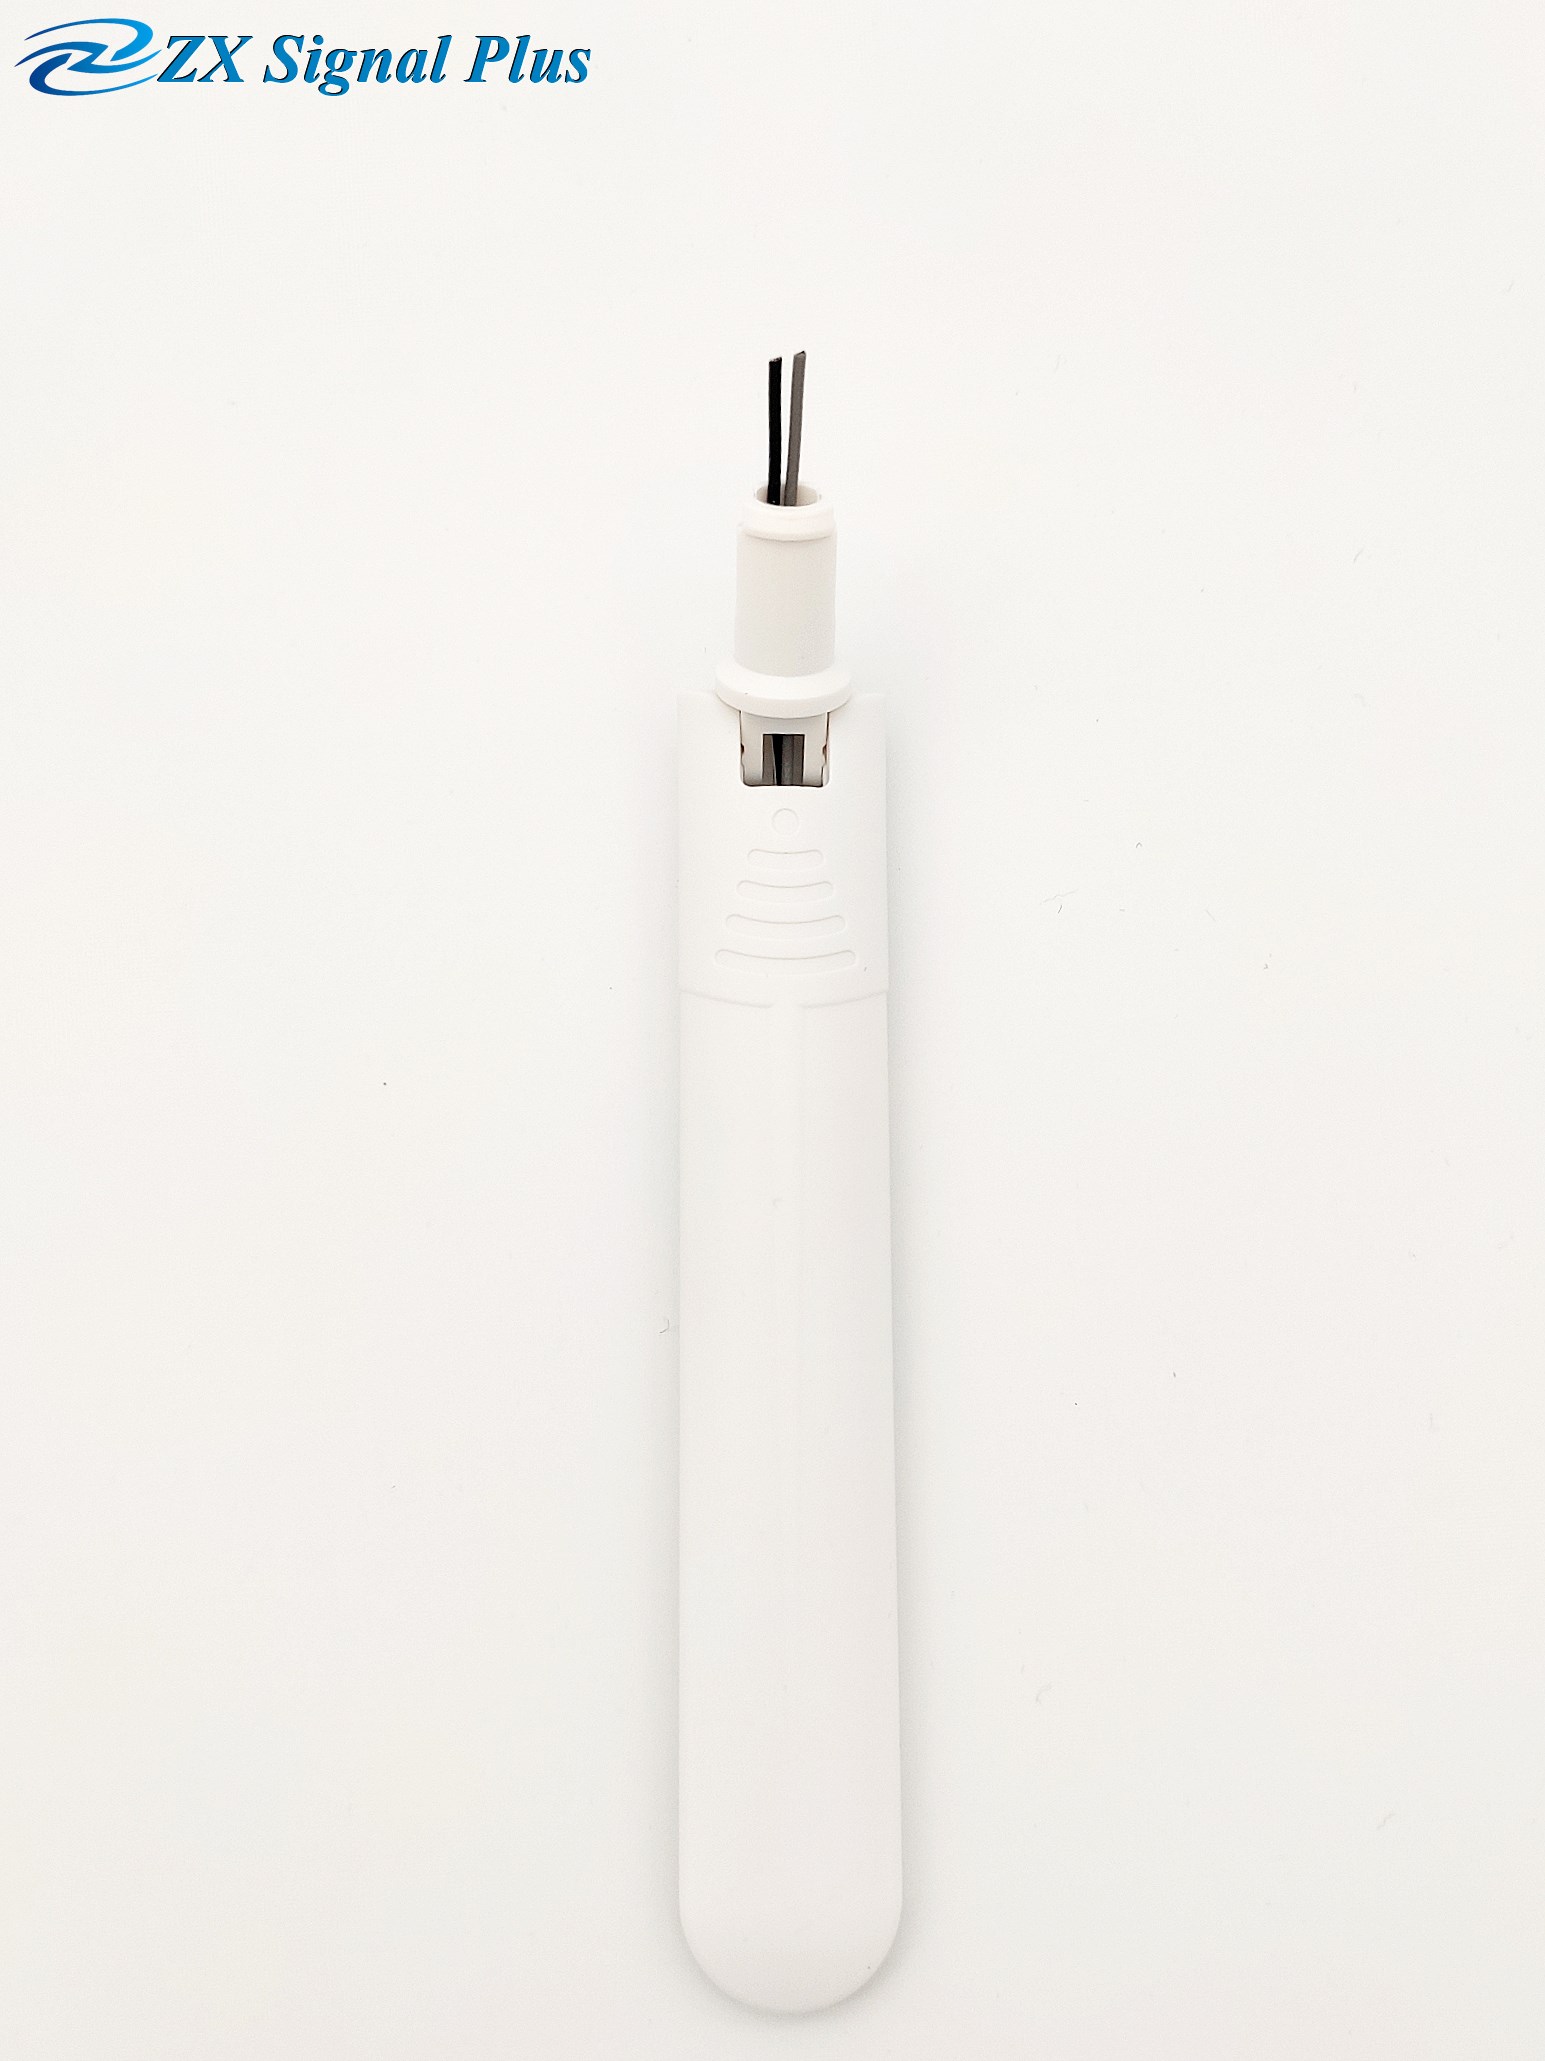 wifi router antenna Manufacturer, wifi router antenna For Sale 